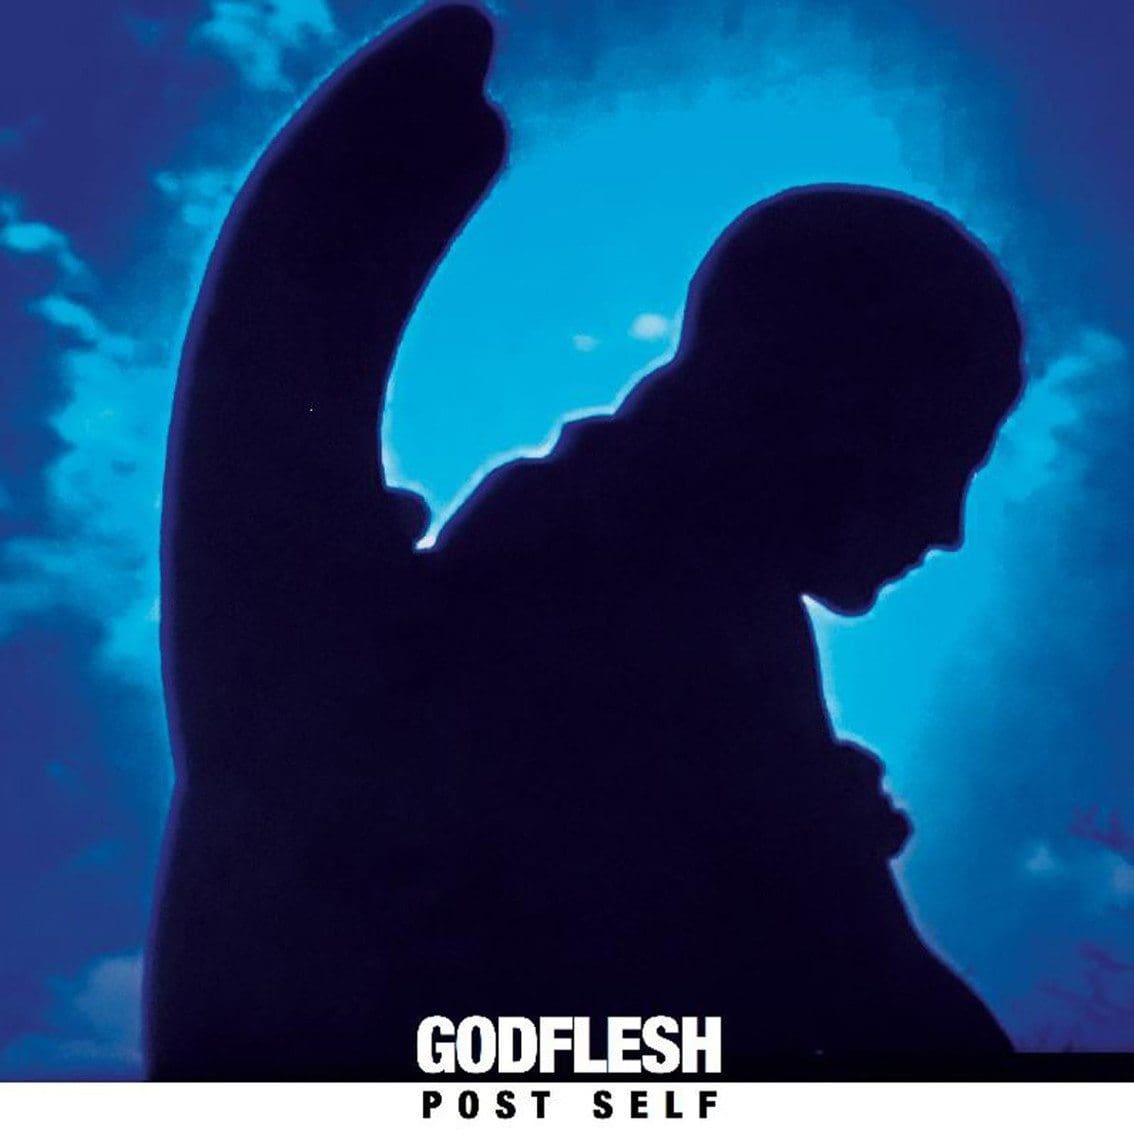 Godflesh returns with a brand new album: 'Post Self' - available now on vinyl and CD